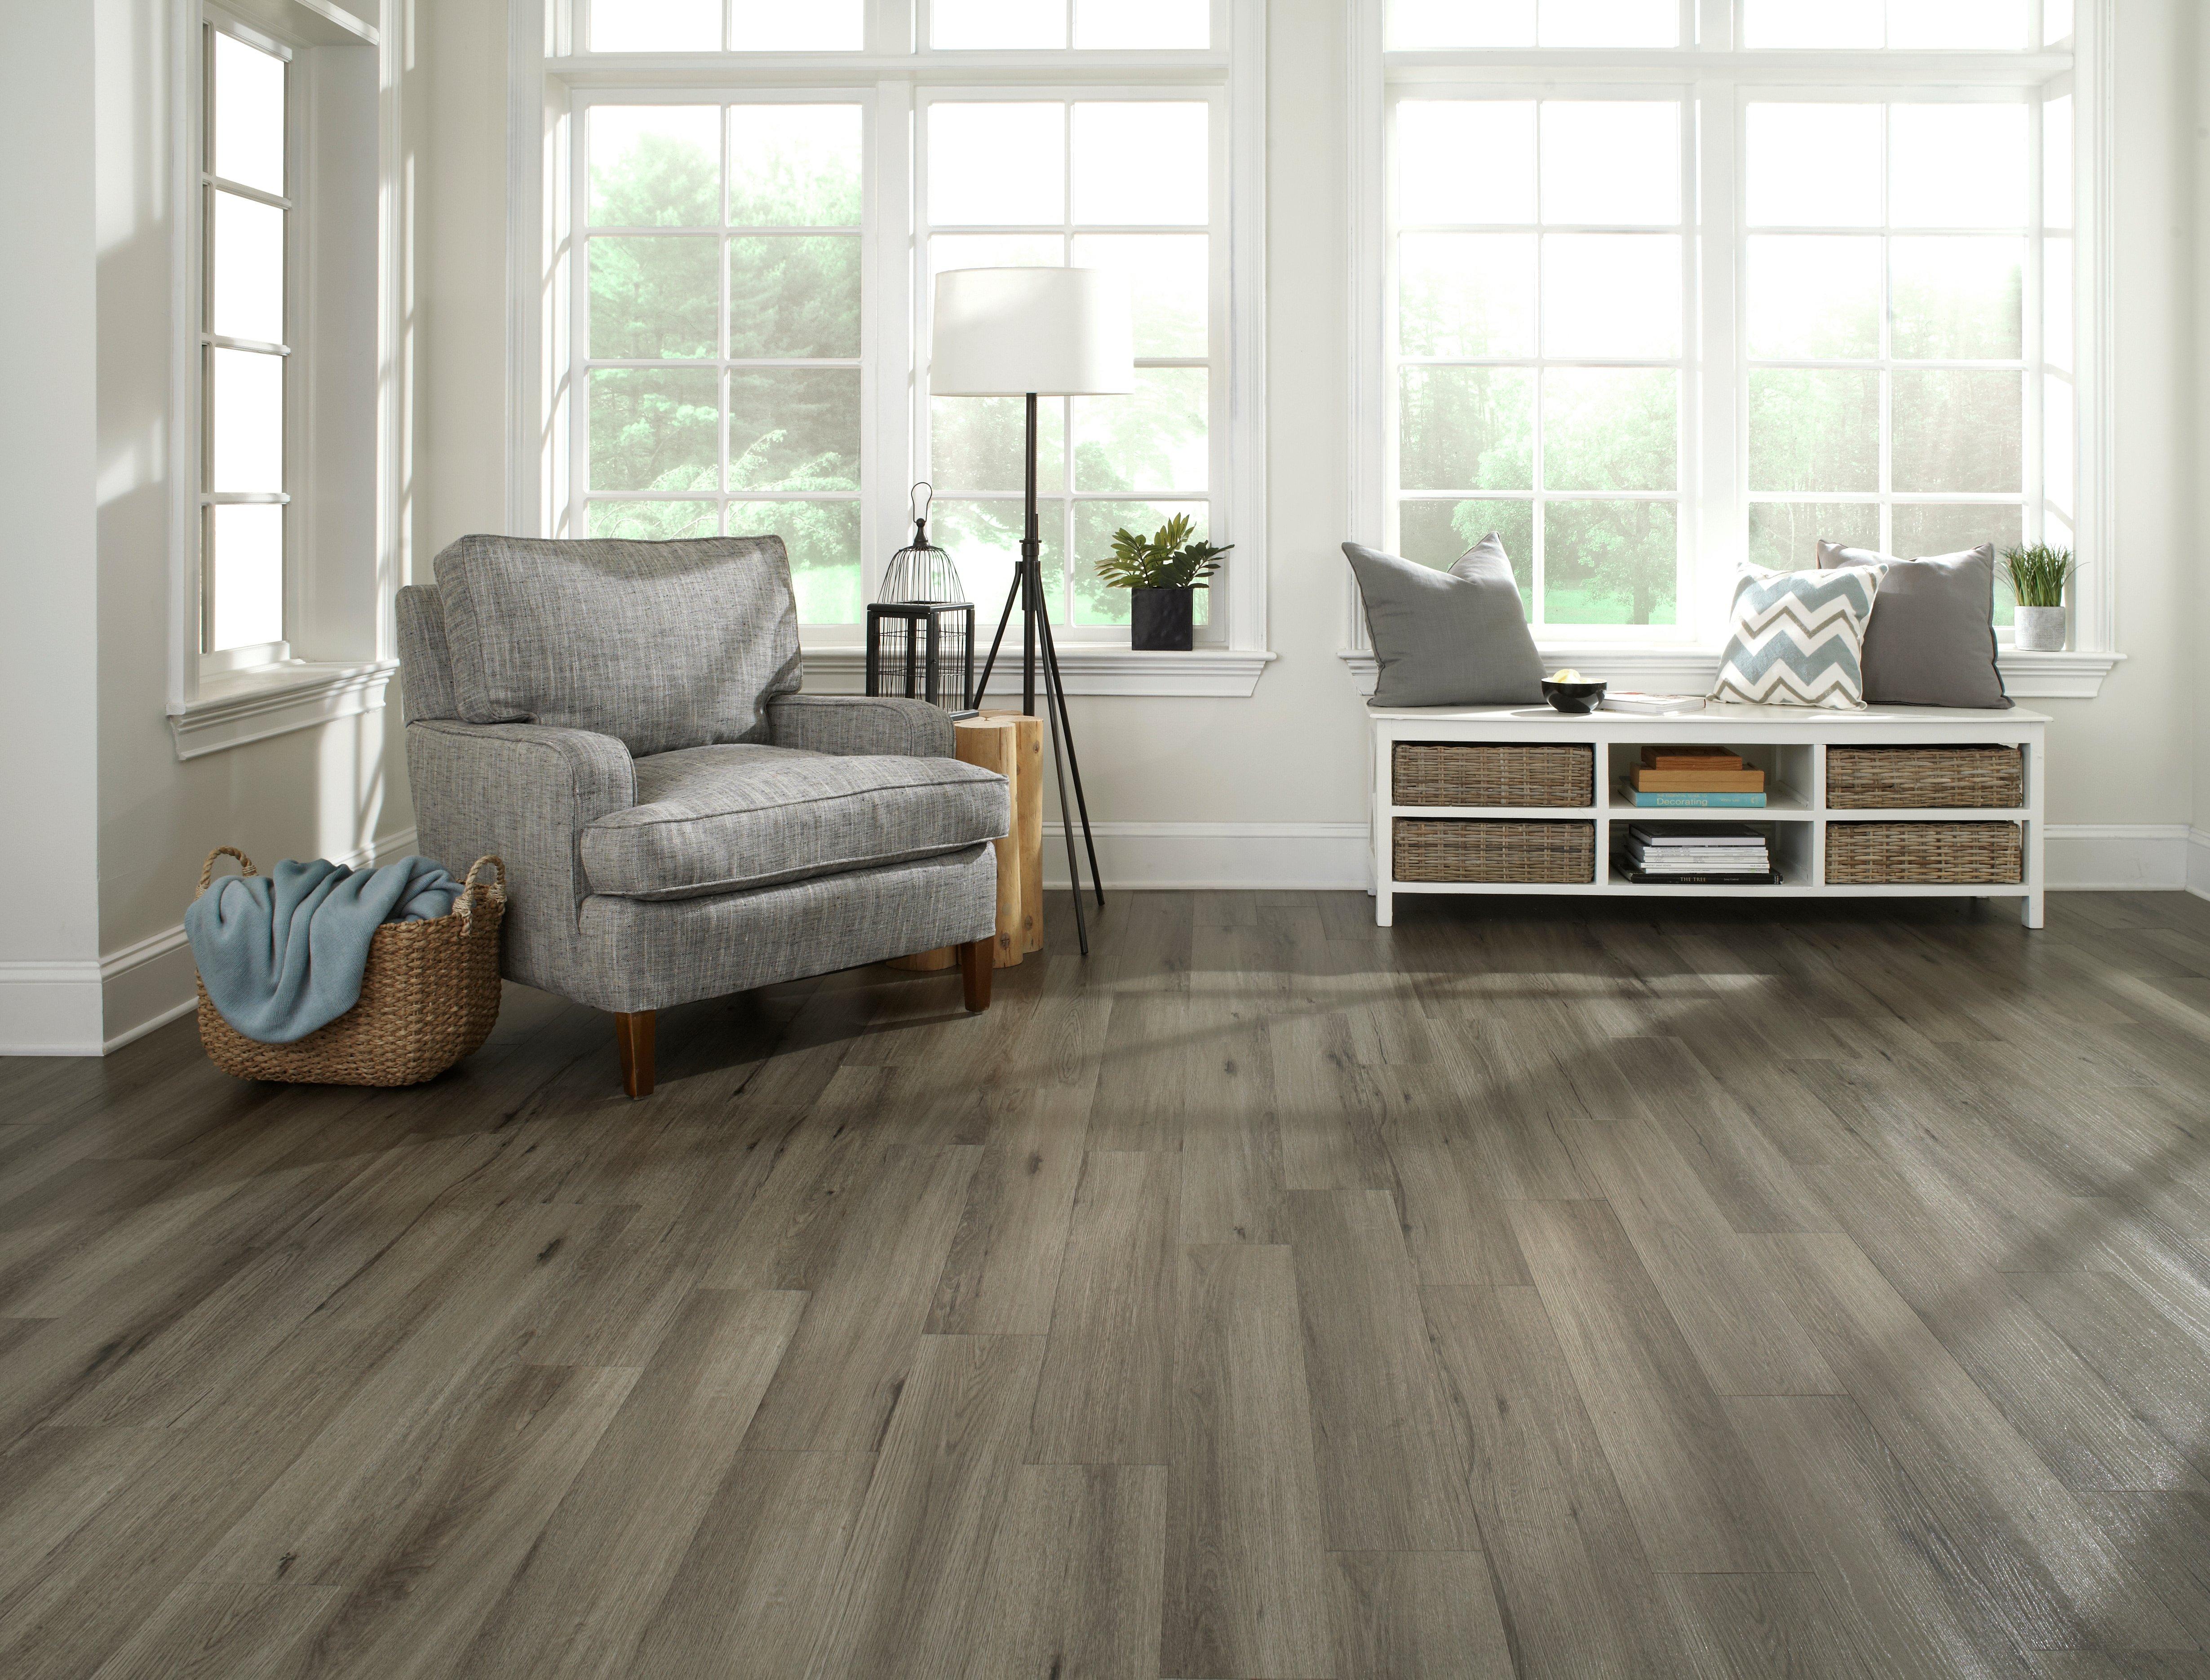 Your floors should meet the needs of your lifestyle, but also reflect your  personal style! Read on to find out the best flooring options for your  lifestyle.